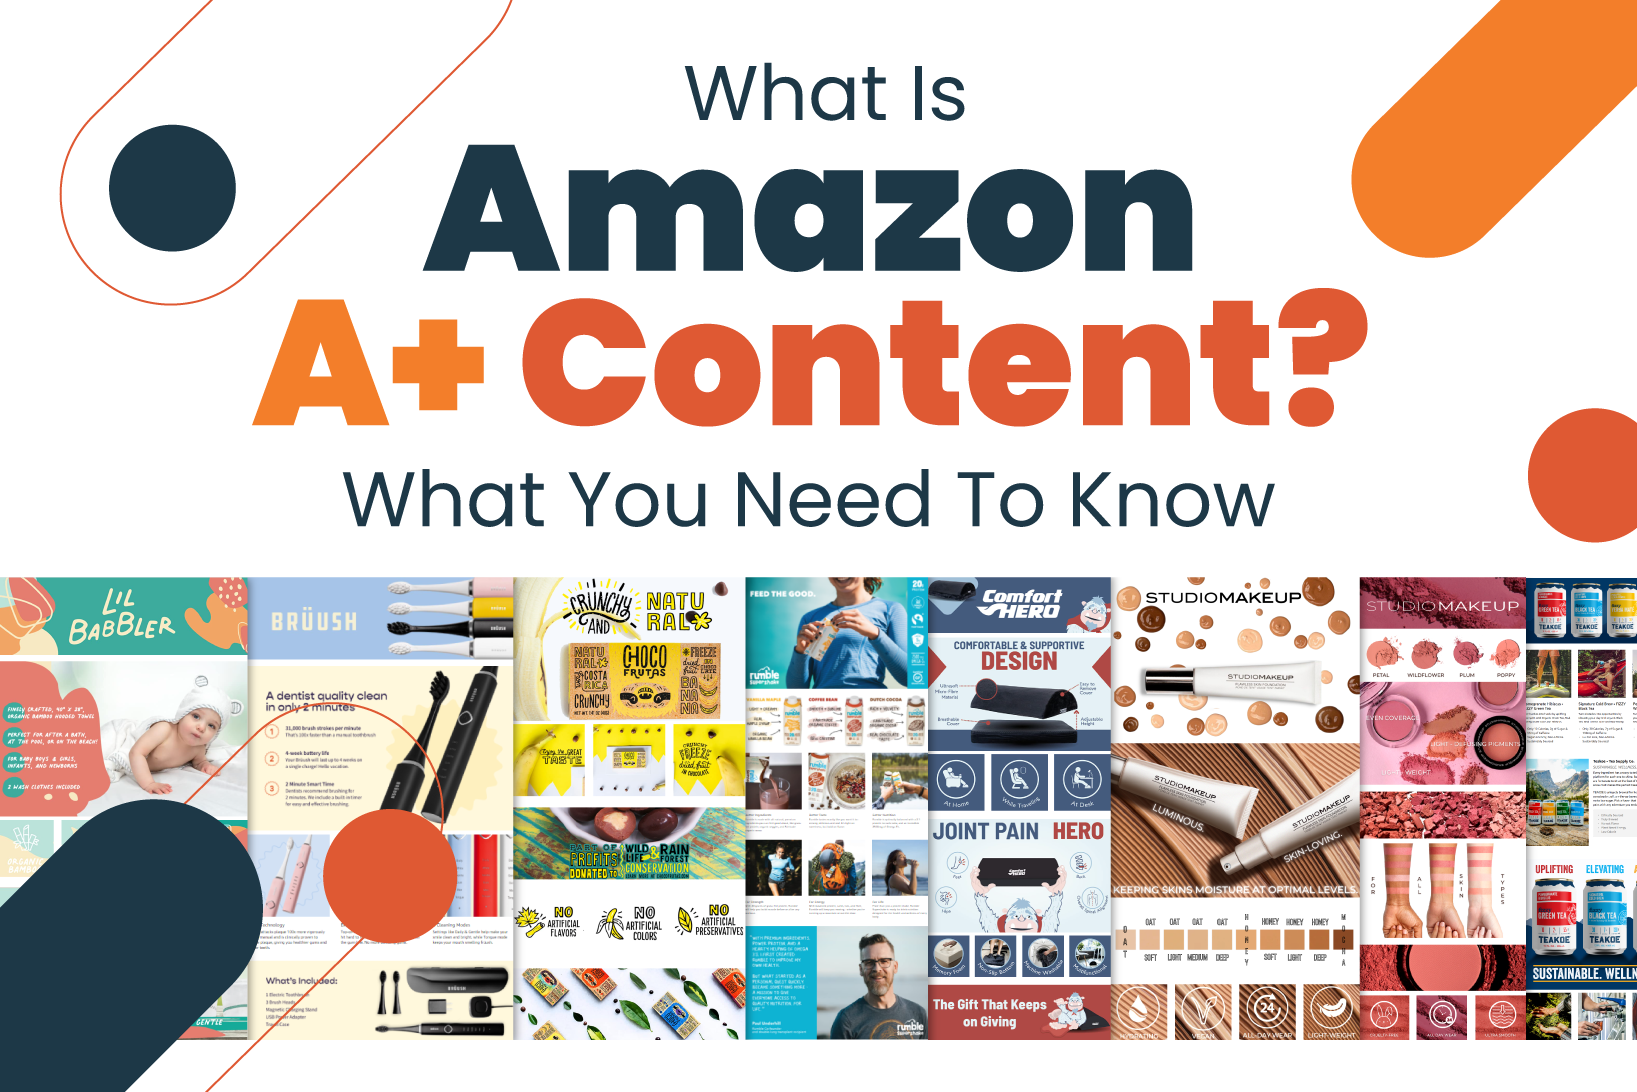 What Is Amazon A+ Content? What You Need To Know